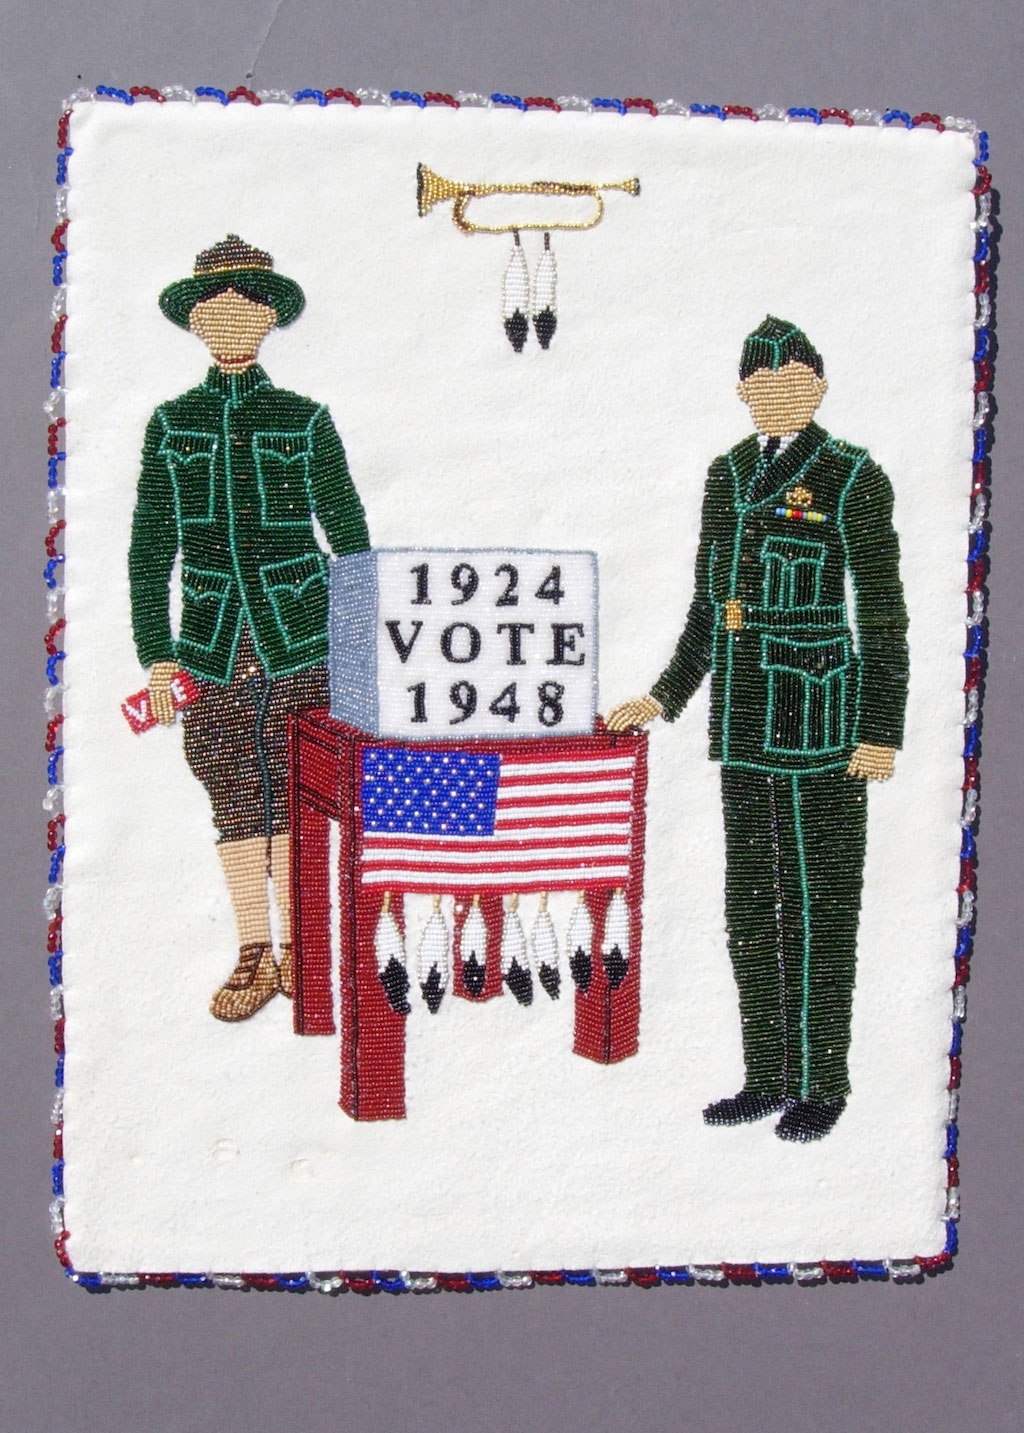 Teri Greeves, Sovereign Citizen, 2008, SERVICE, Craft in America